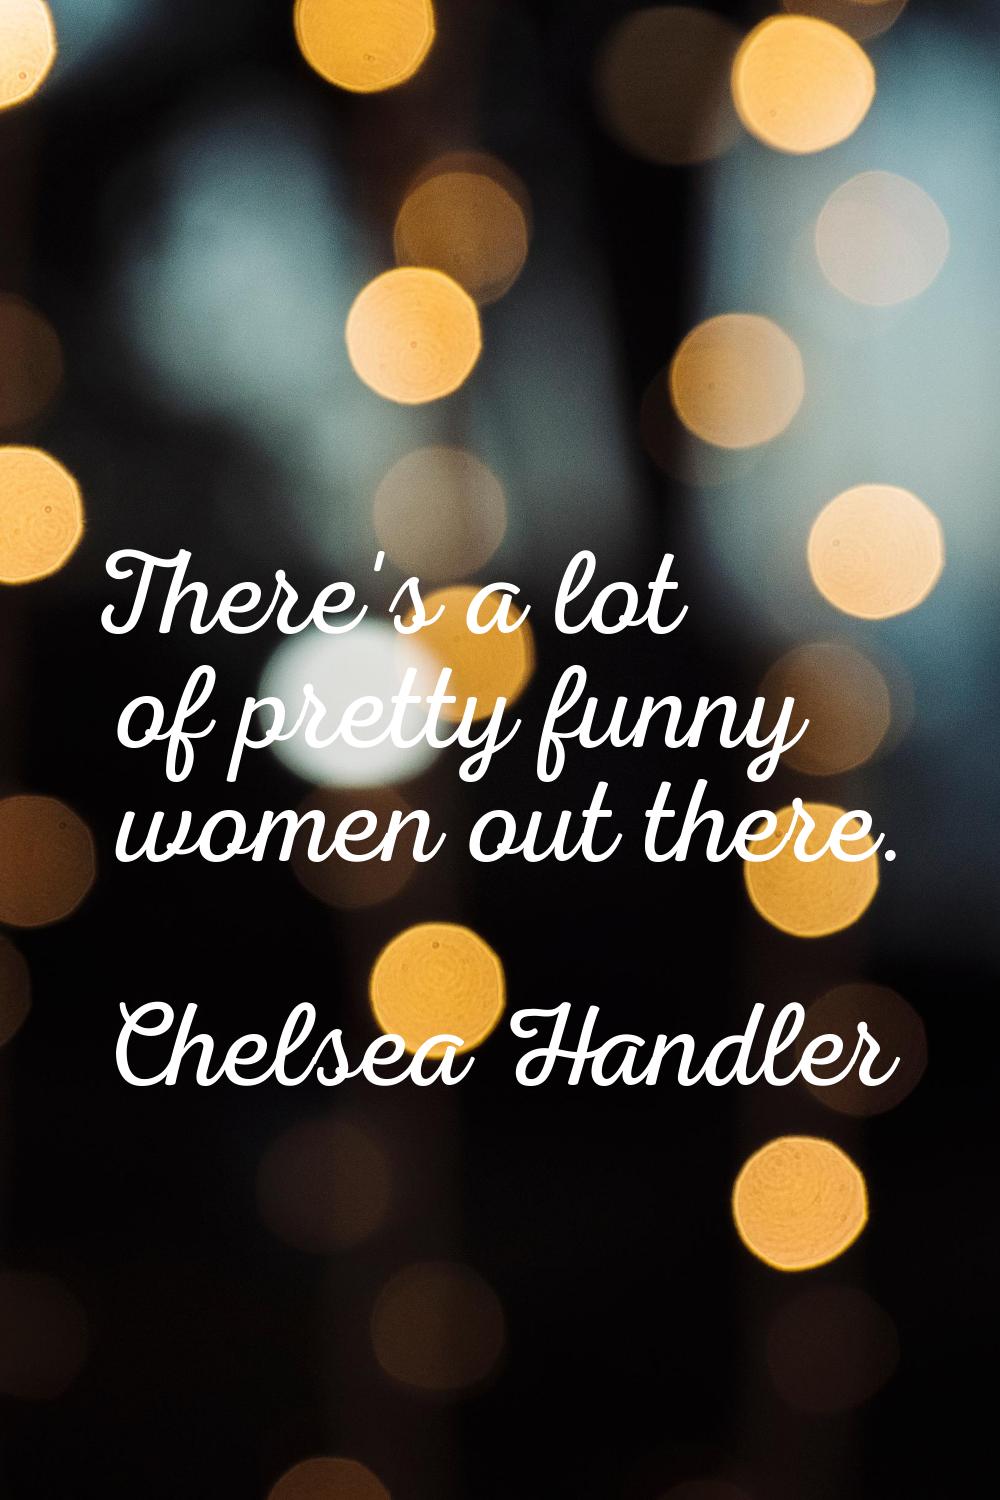 There's a lot of pretty funny women out there.